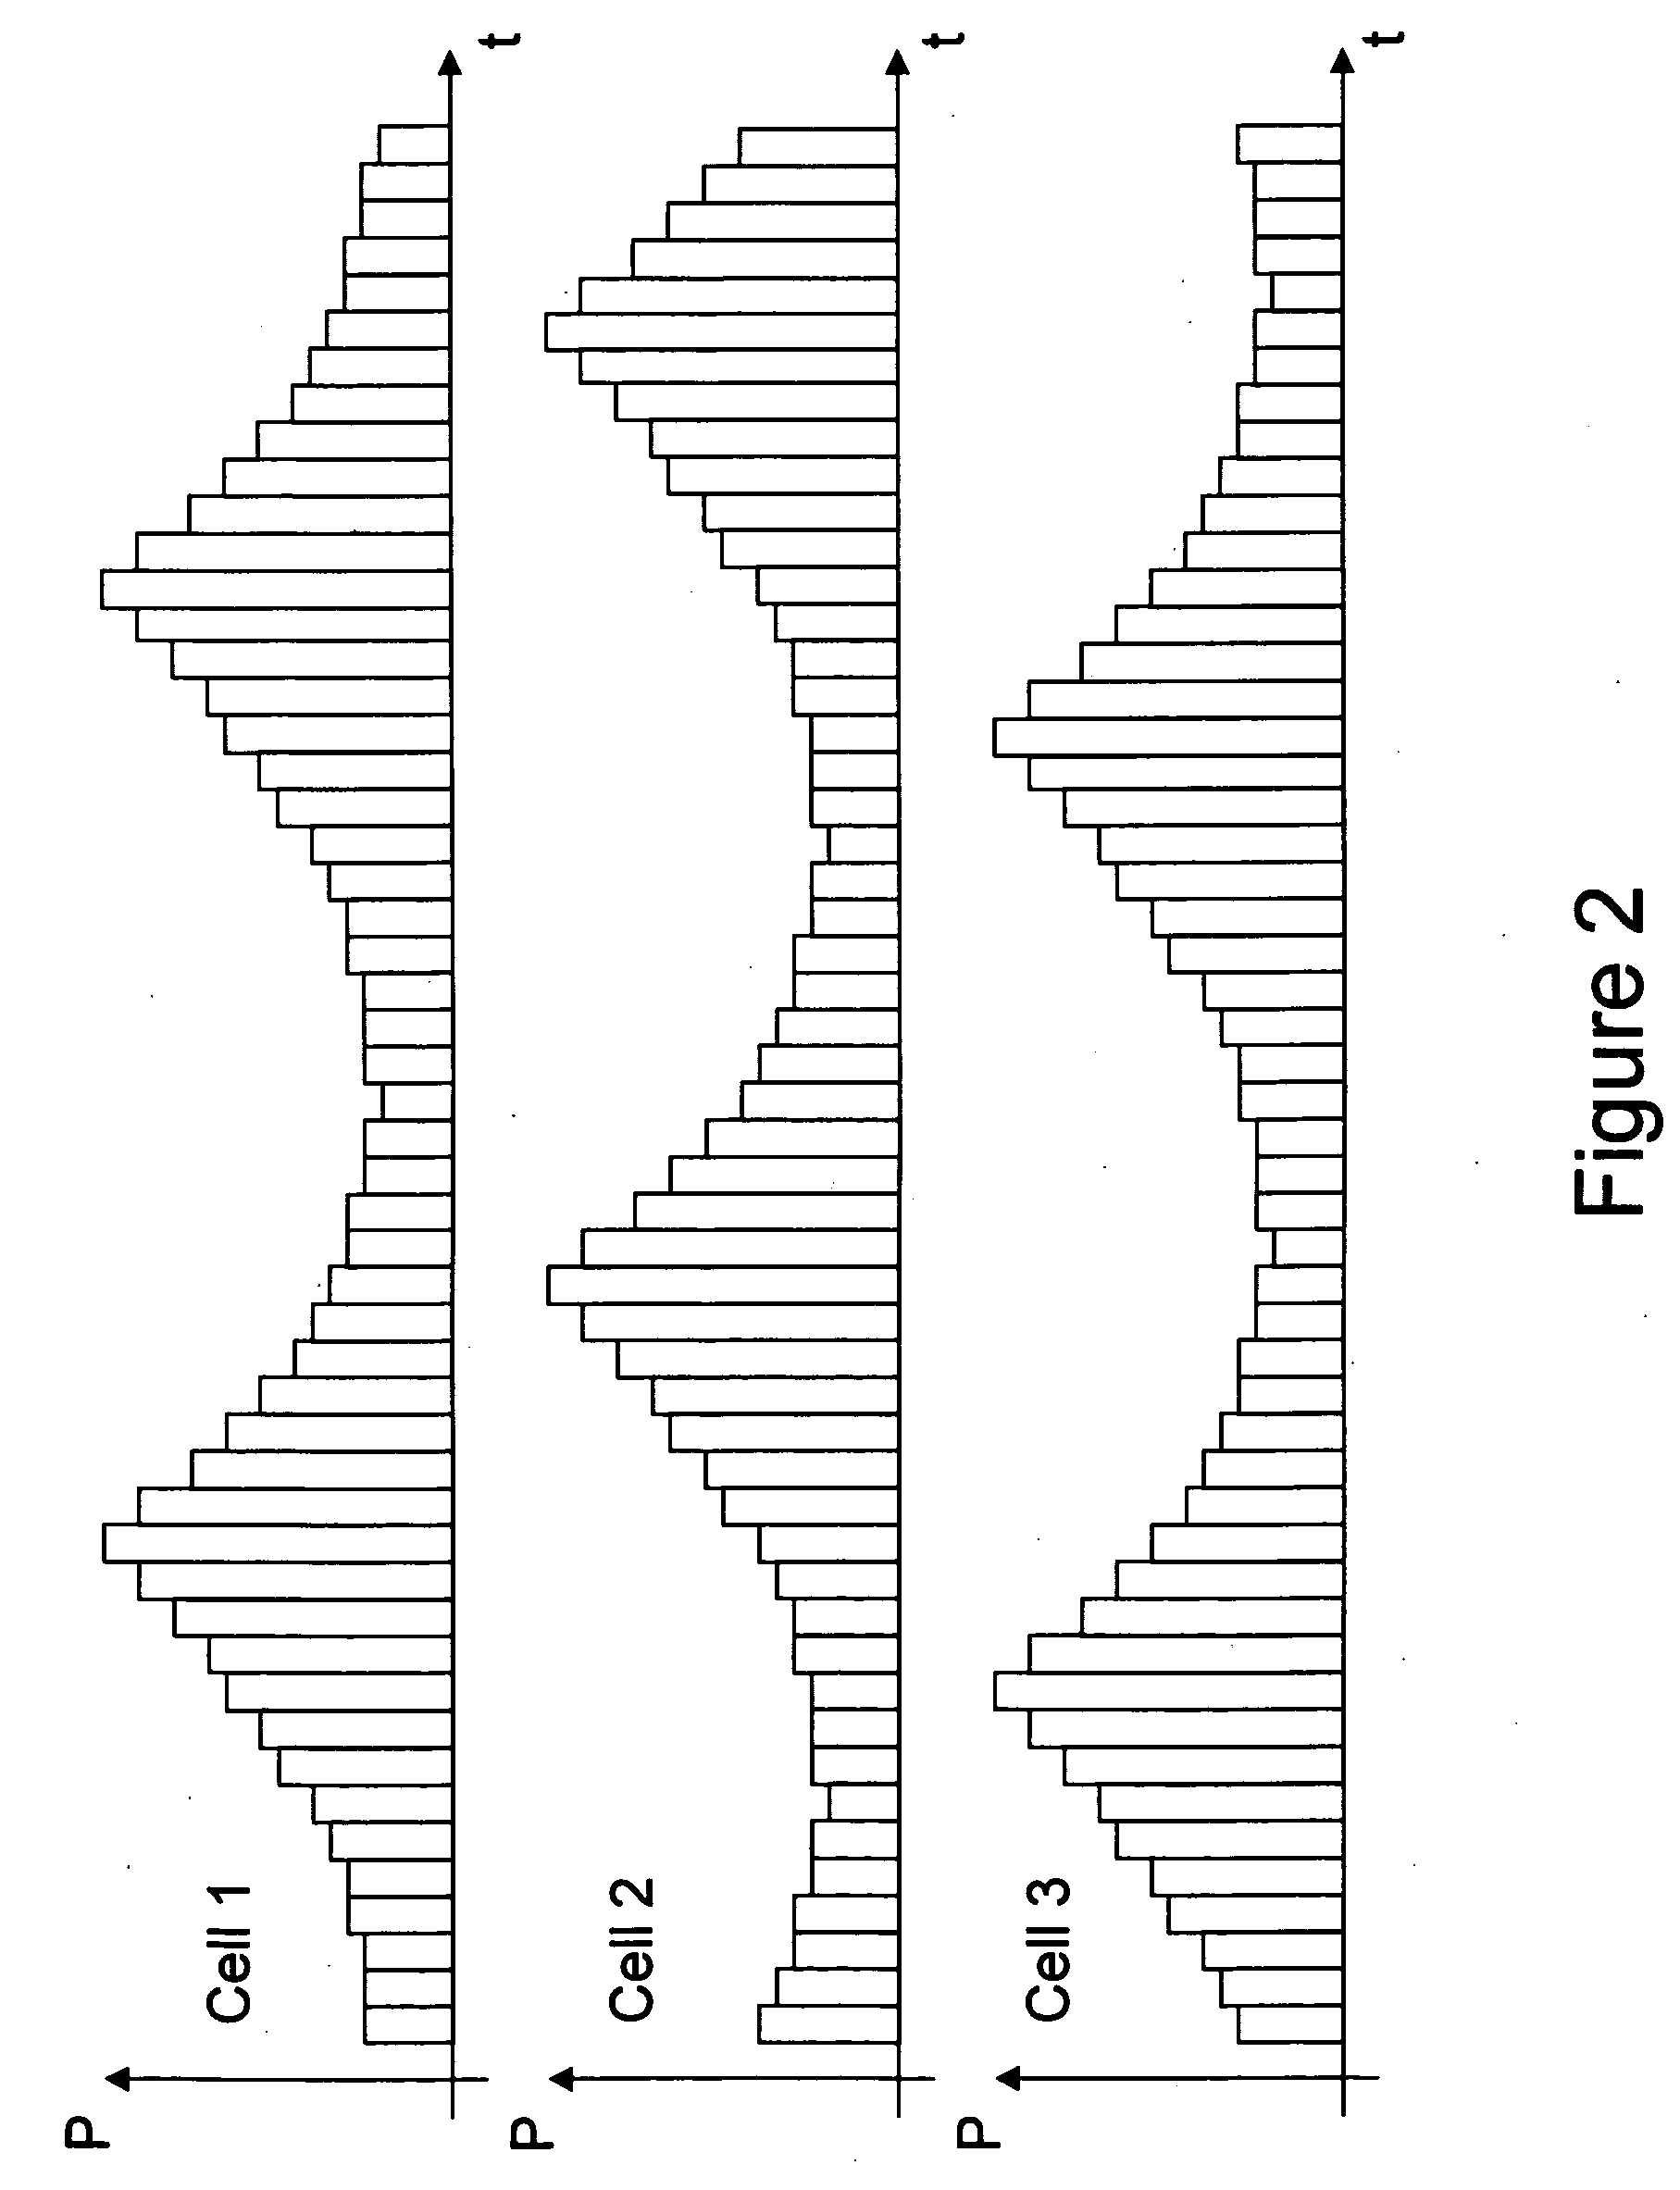 Transmitting of cell management information in a cellular communication network